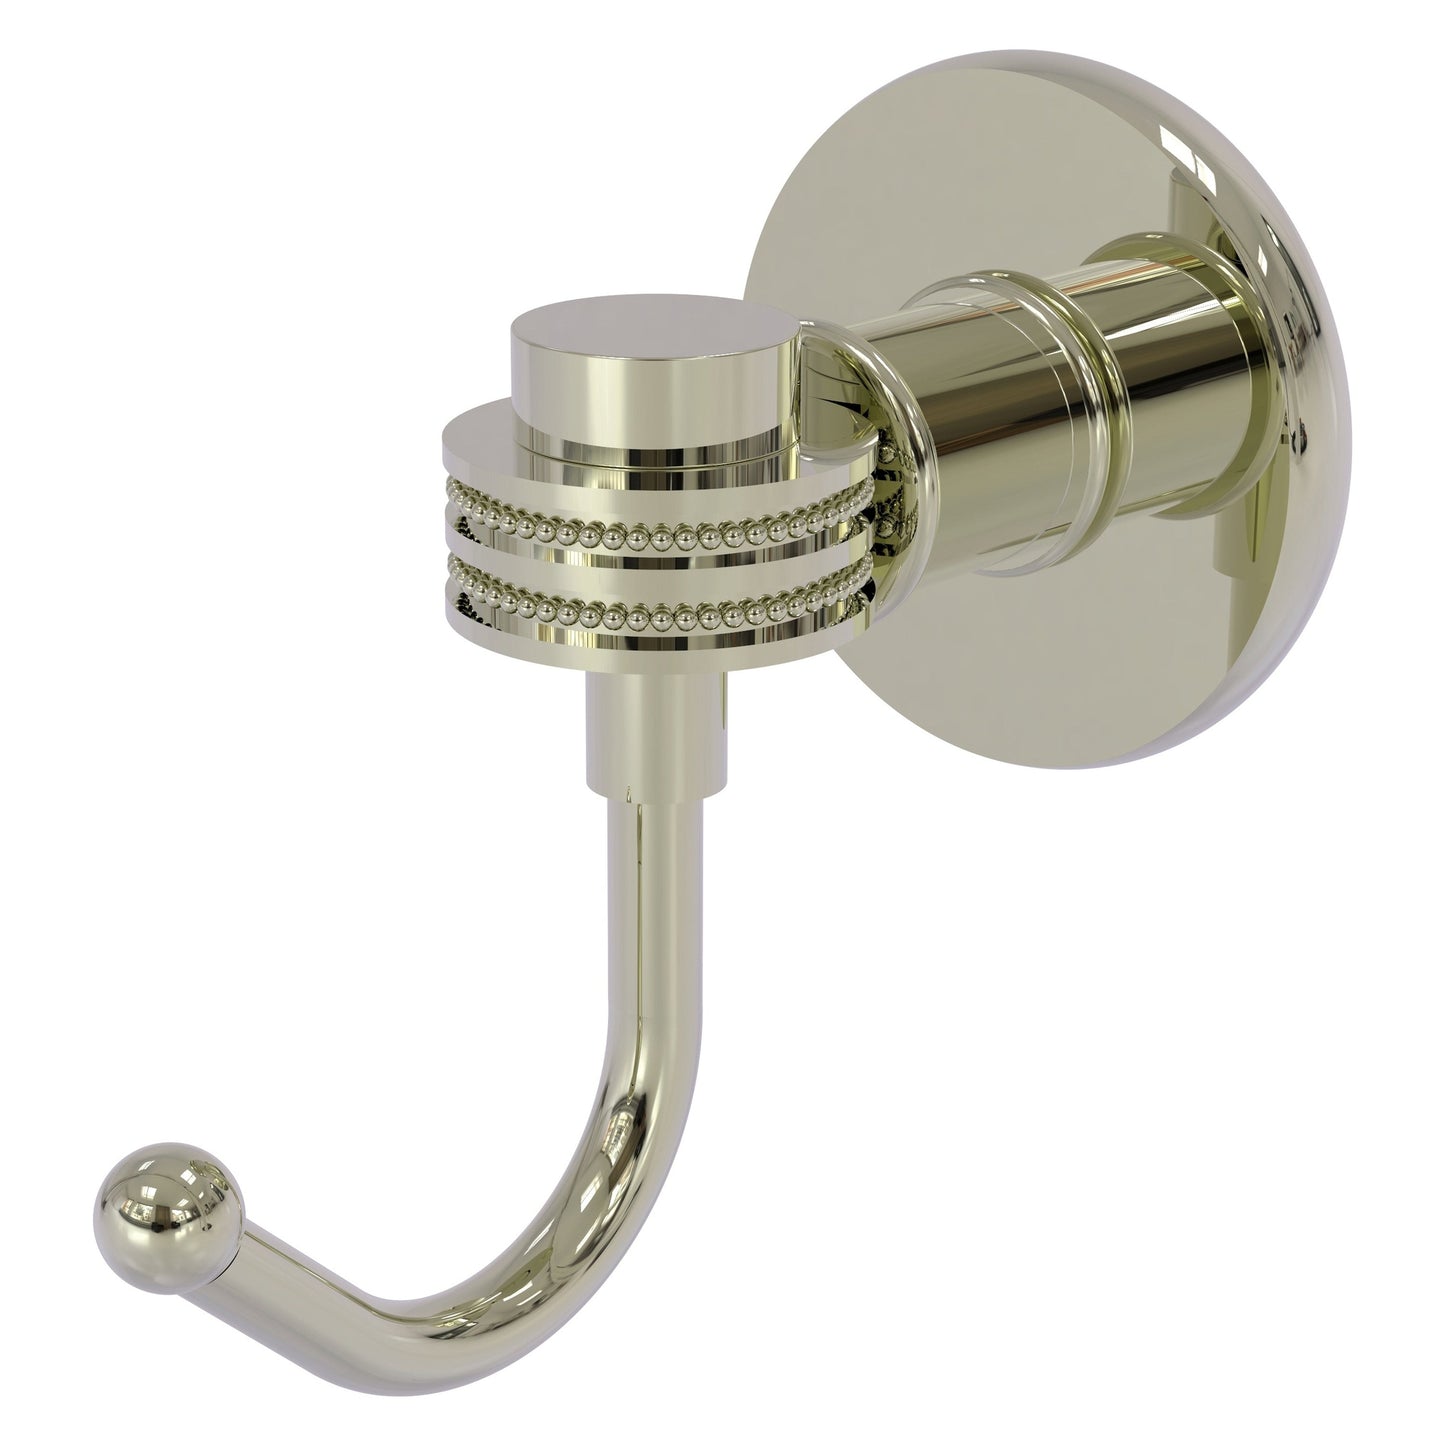 Allied Brass Skyline 2020D 2.8" x 4.77" Polished Nickel Solid Brass Robe Hook With Dotted Accents